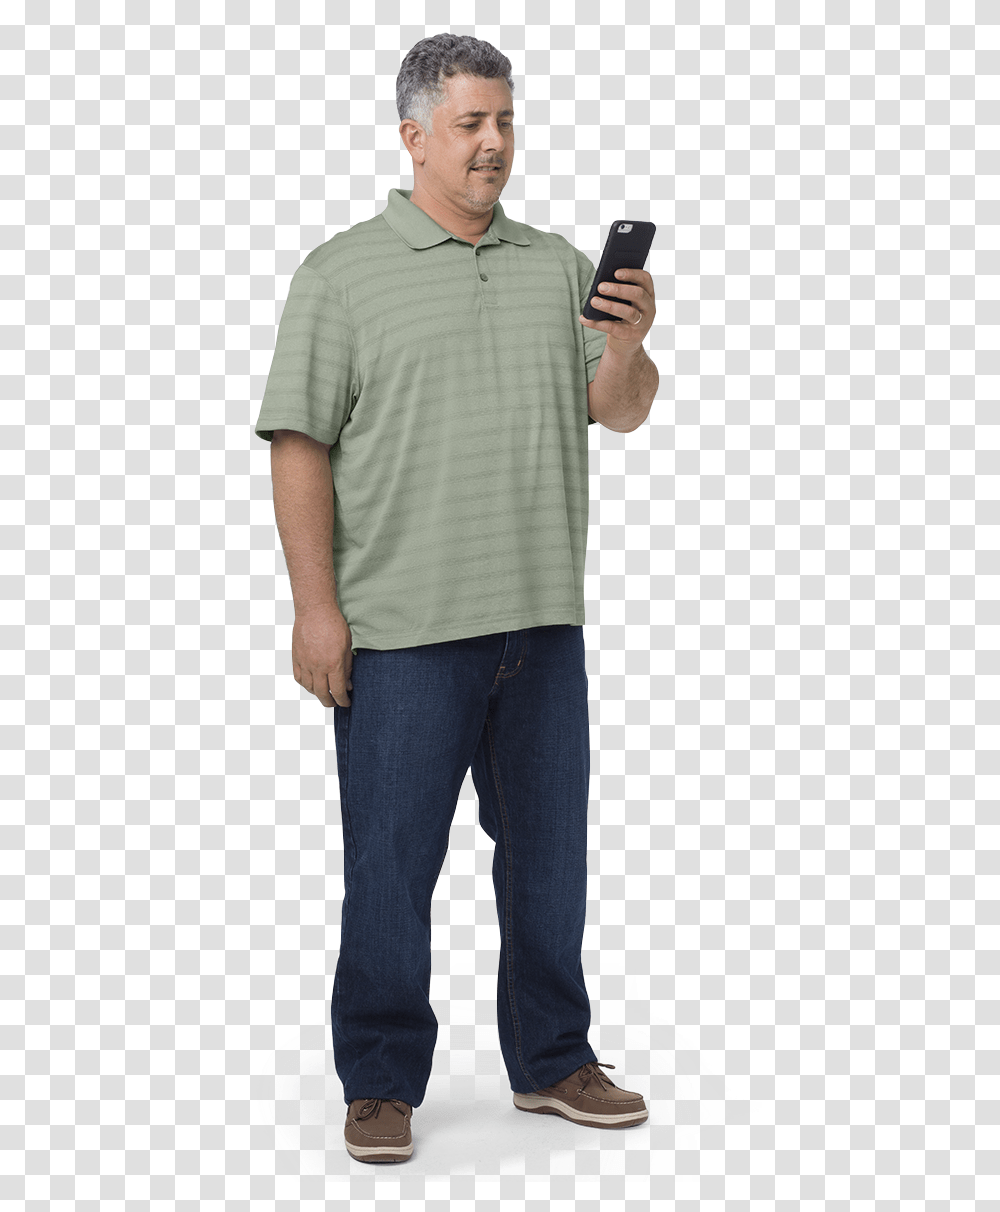 Savings & Support Basaglar Insulin Glargine Injection Someone Looking At The Phone, Clothing, Shoe, Footwear, Person Transparent Png